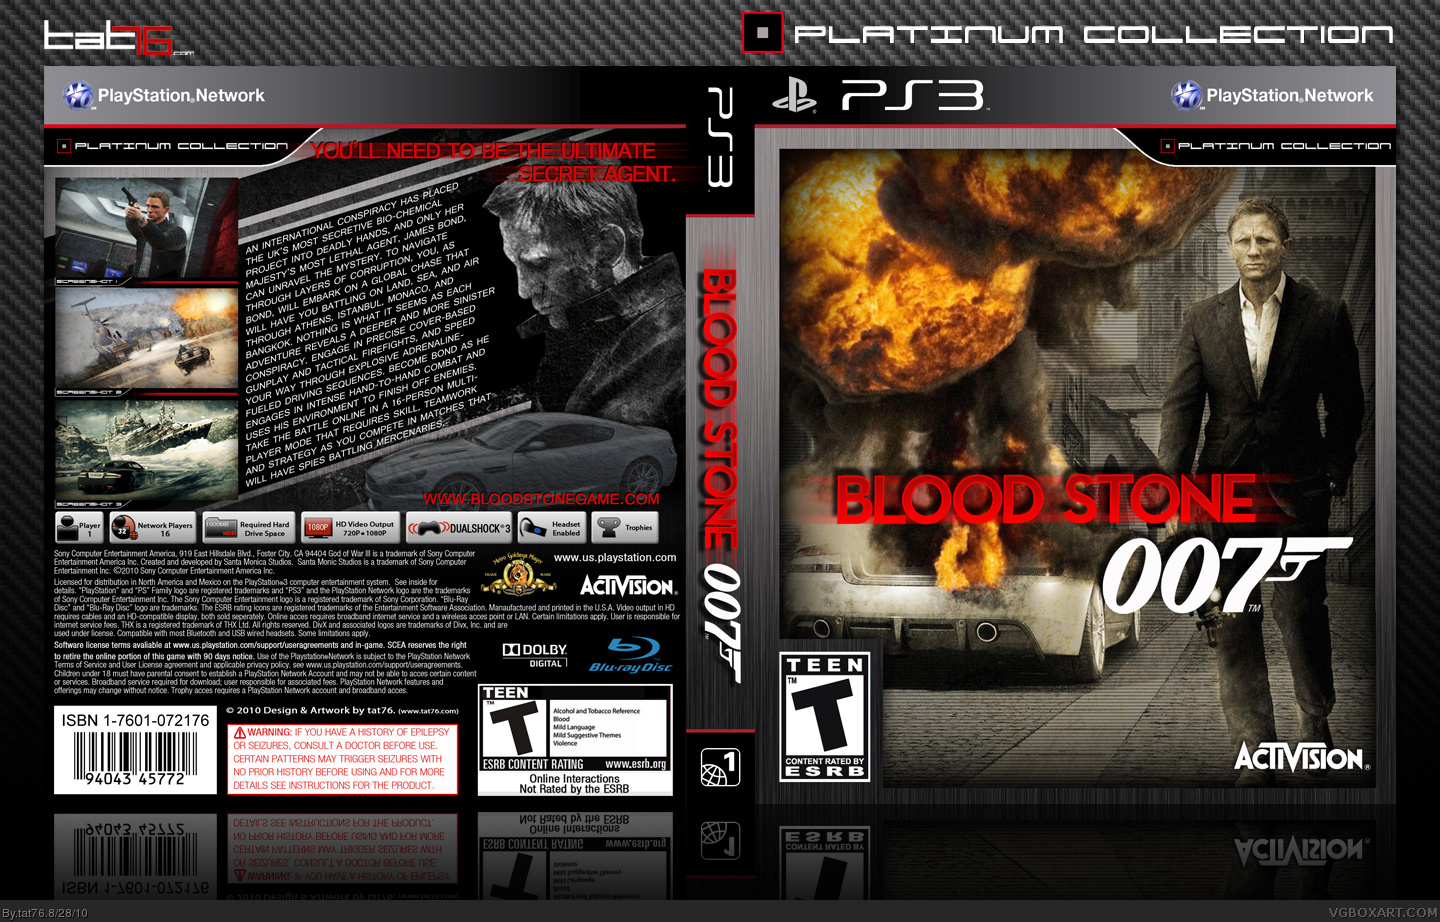 007 Blood Stone box cover